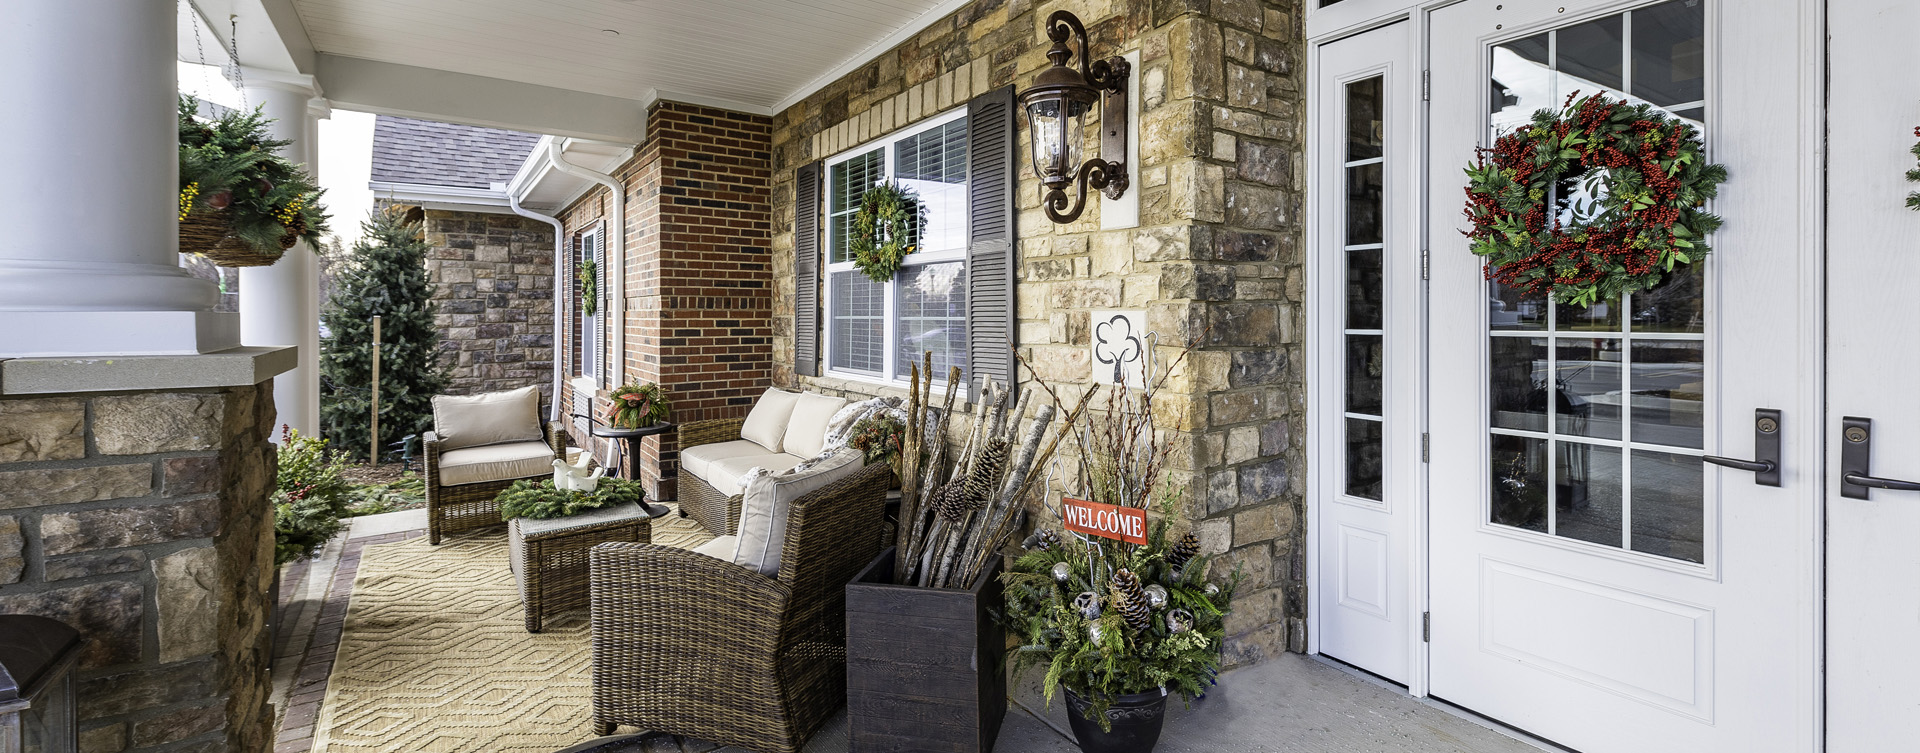 Enjoy conversations with friends on the porch at Bickford of Canton